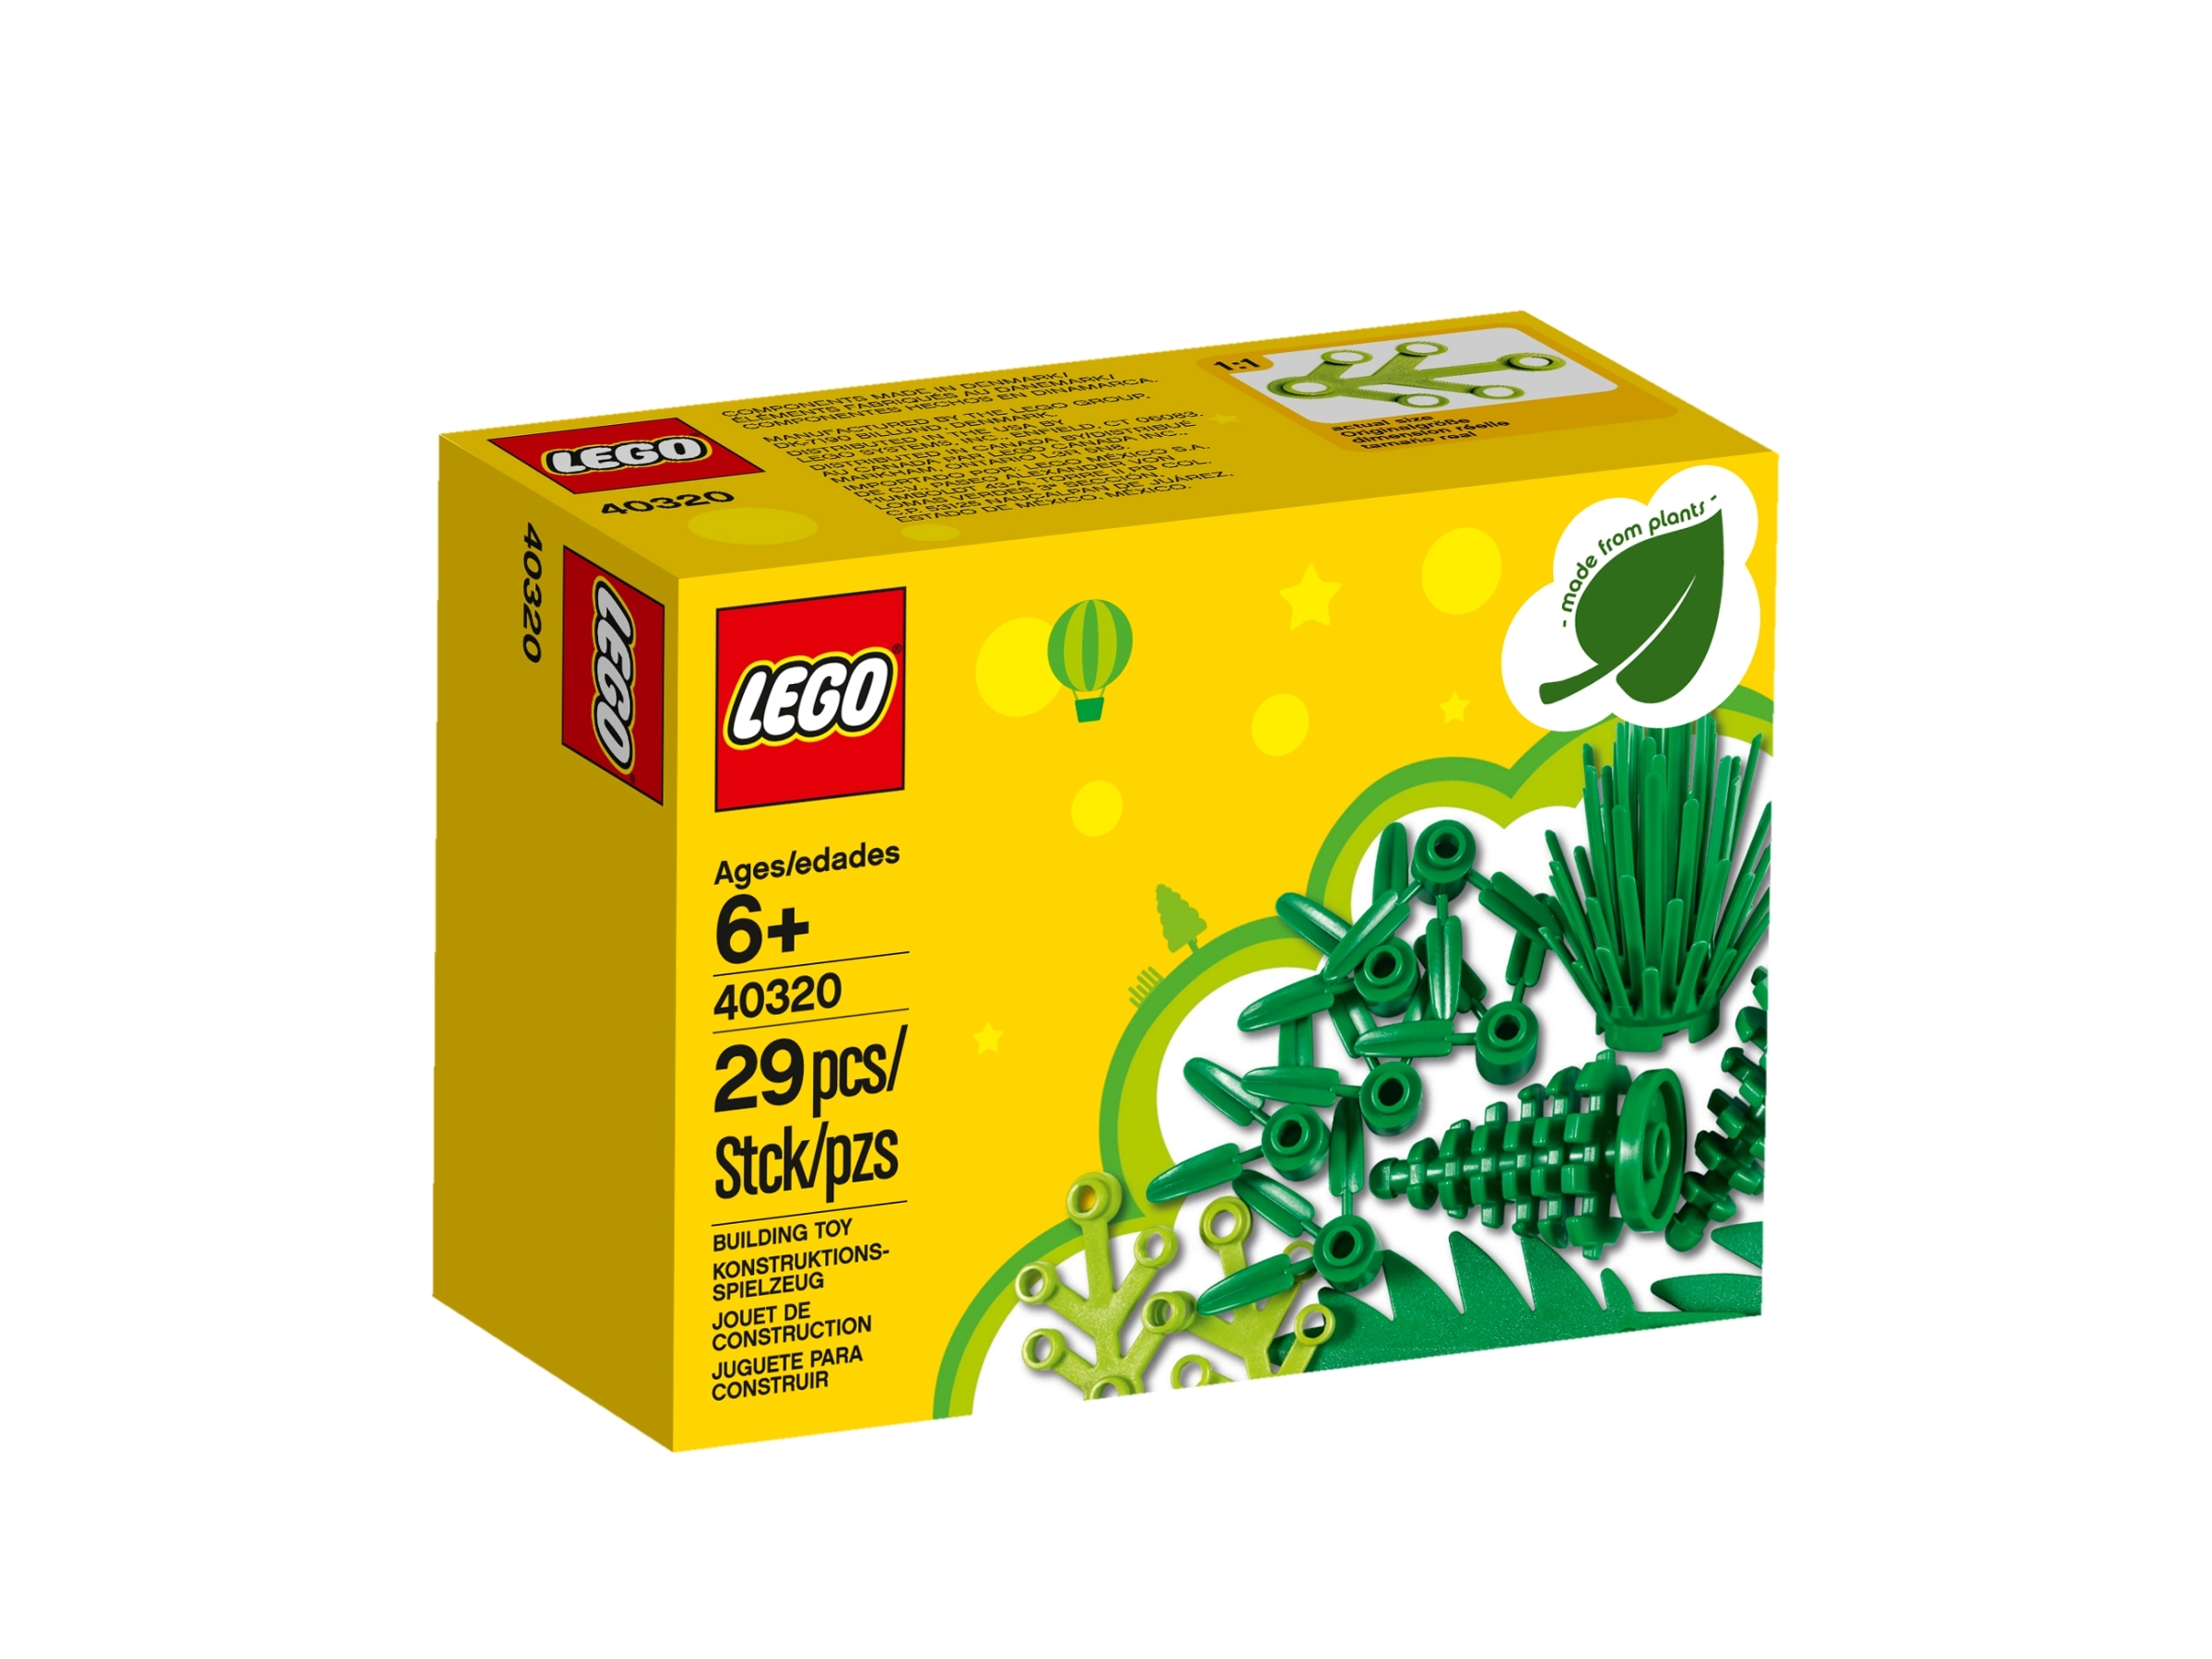 Plants from Plants 40320 | Other | online at Official LEGO® Shop US